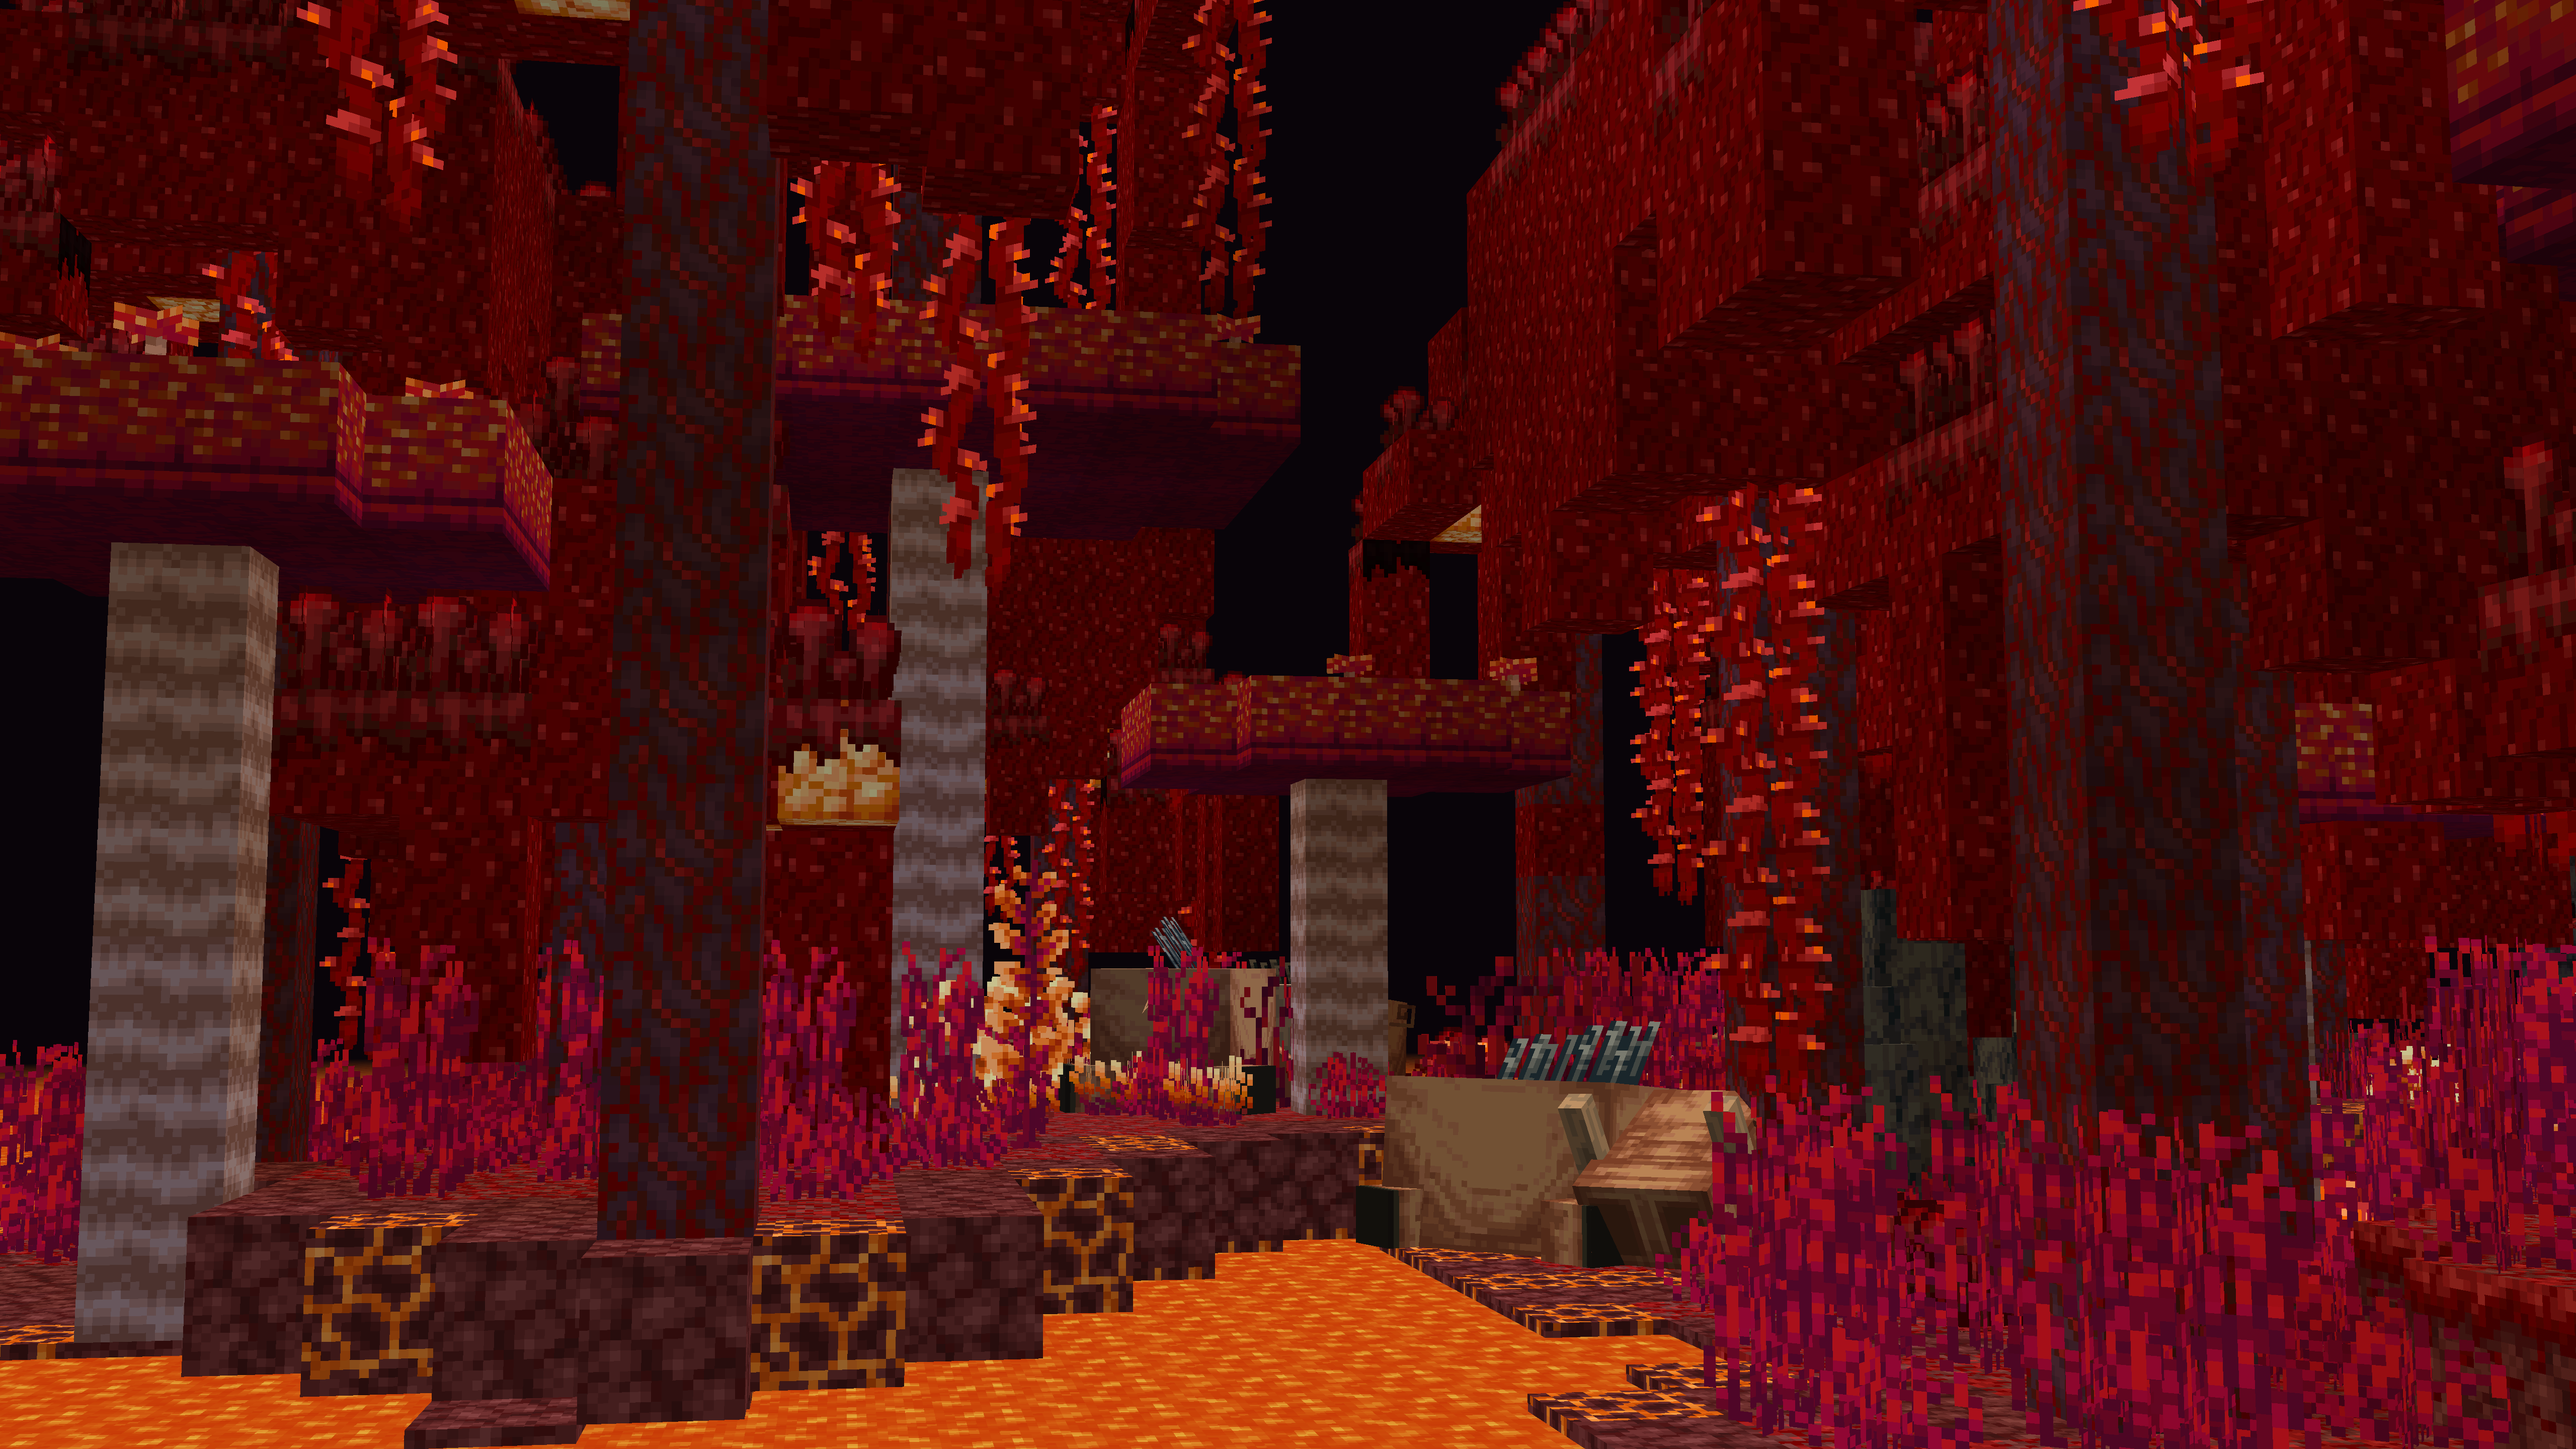 Minecraft: How to Survive the Nether